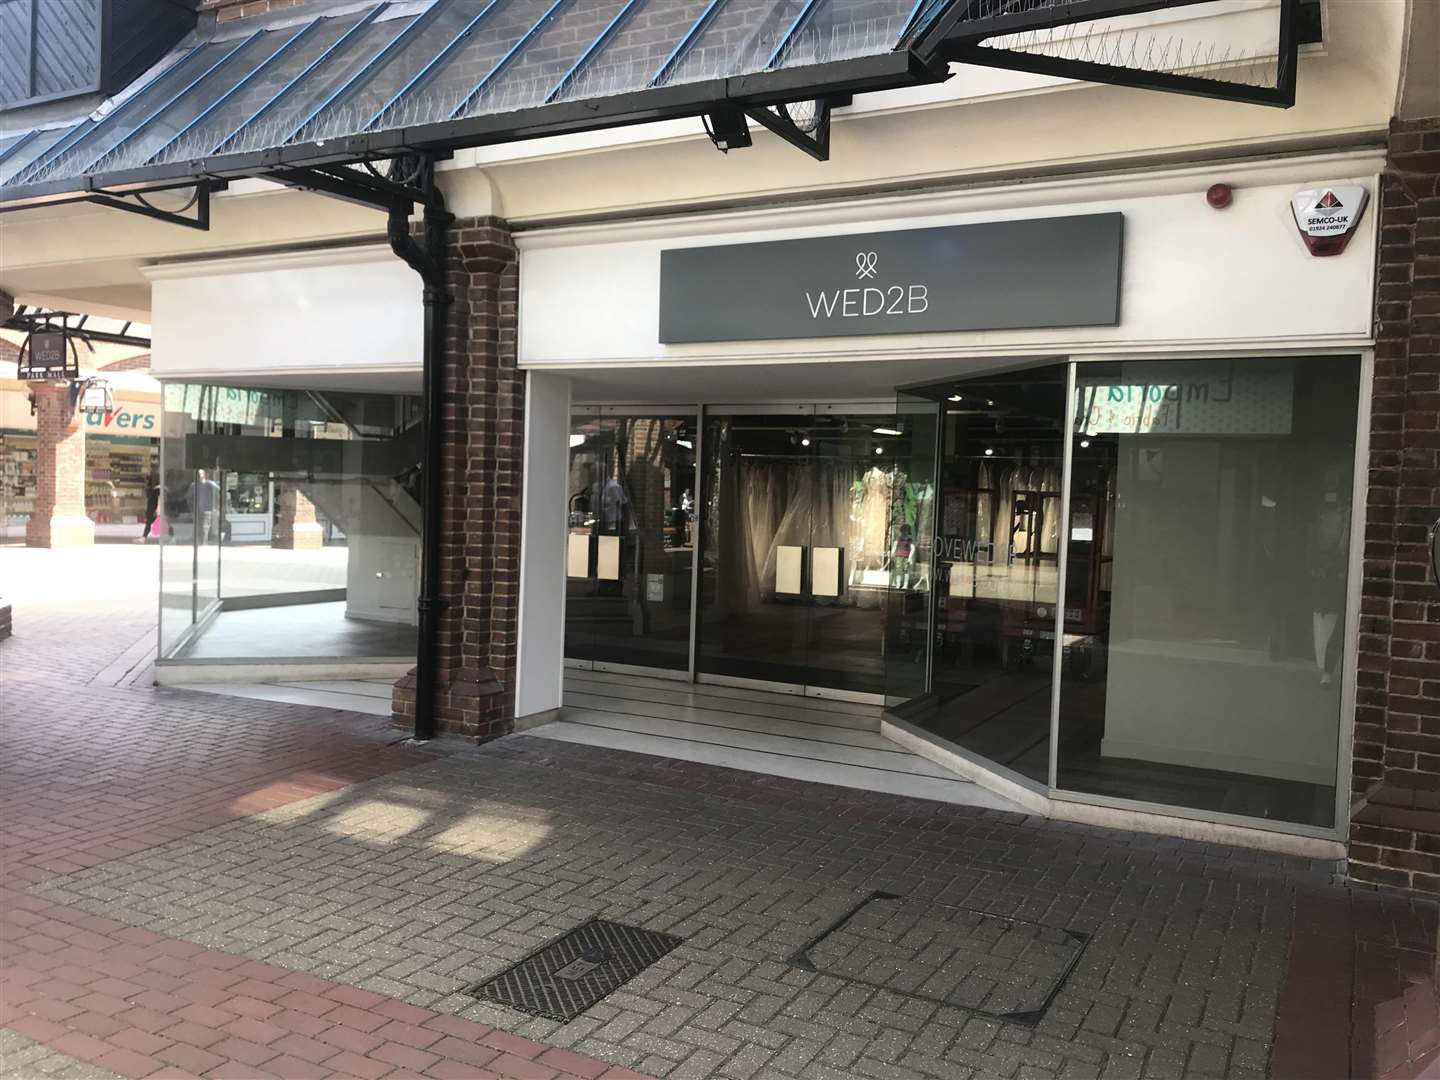 The bridal shop is set to open on Friday